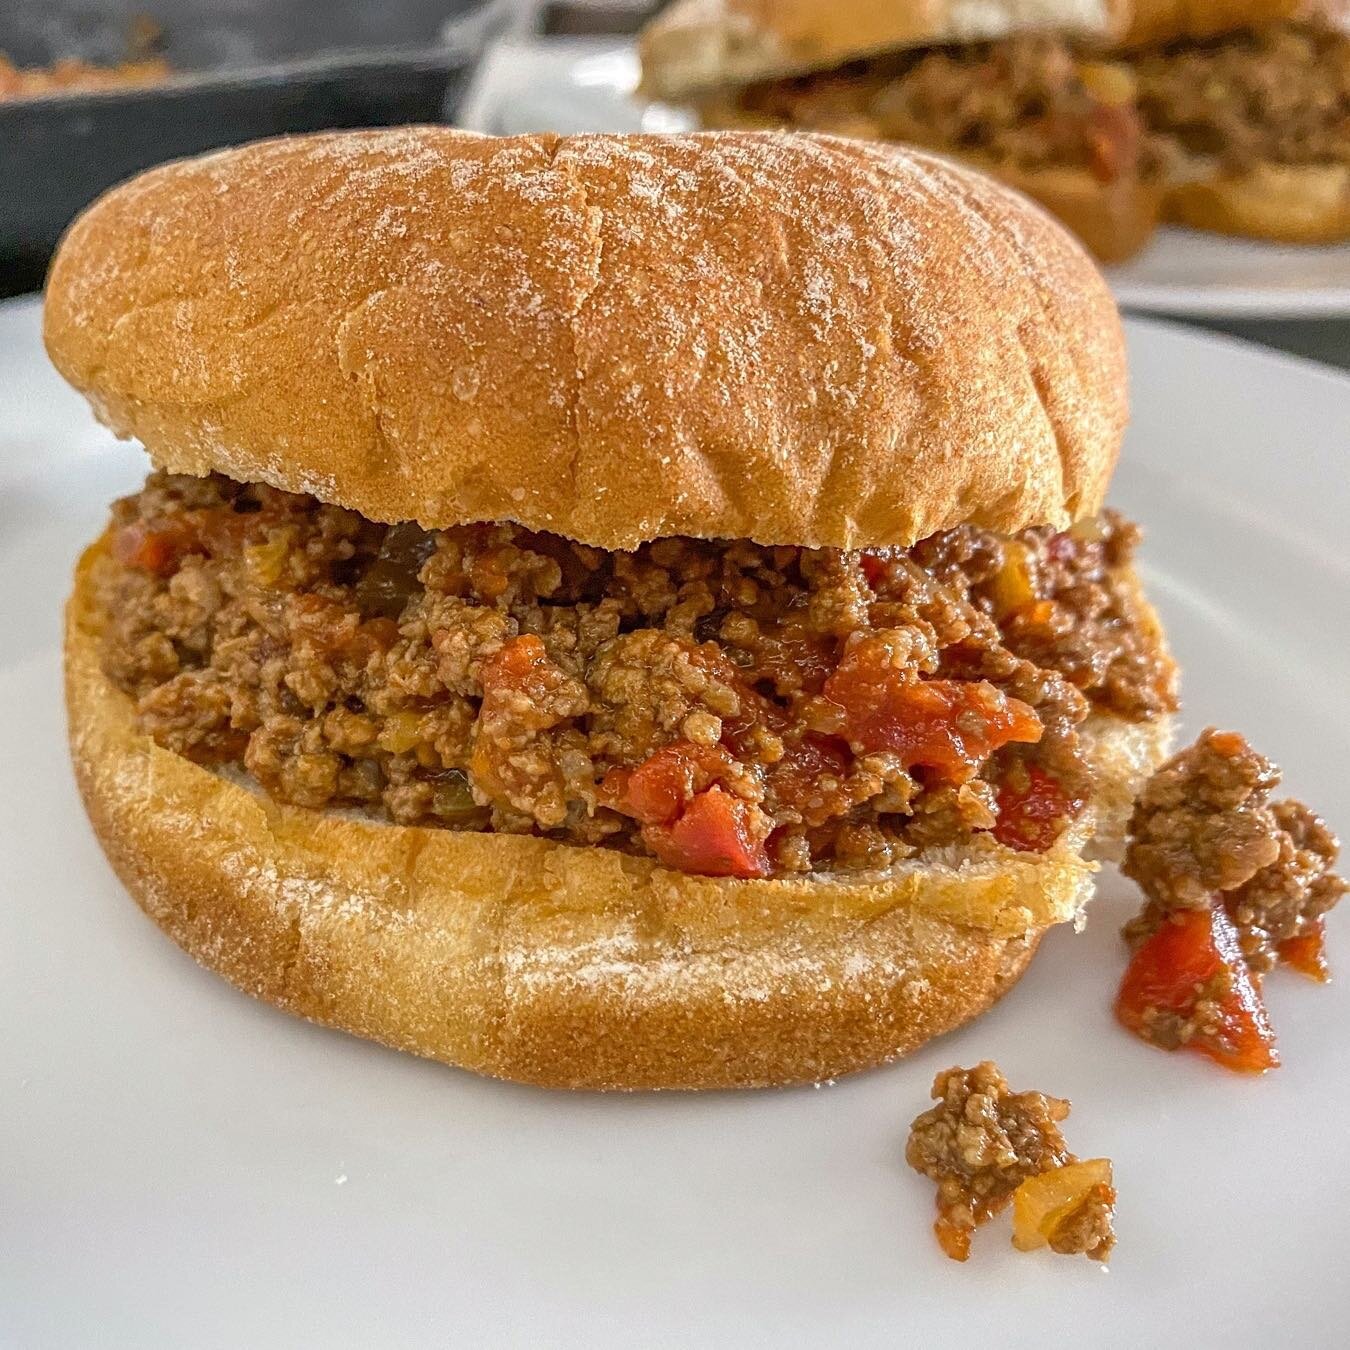 Are Sloppy Joe's still a thing? Try mine, made with ground bison and a homemade sauce with quality ingredients. Swipe for steps!

☝🏼If you want to add another veggie besides the onion to mix in, try peas or diced zucchini.⁠⁠
💥Sloppy Joe&rsquo;s💥⁠⁠